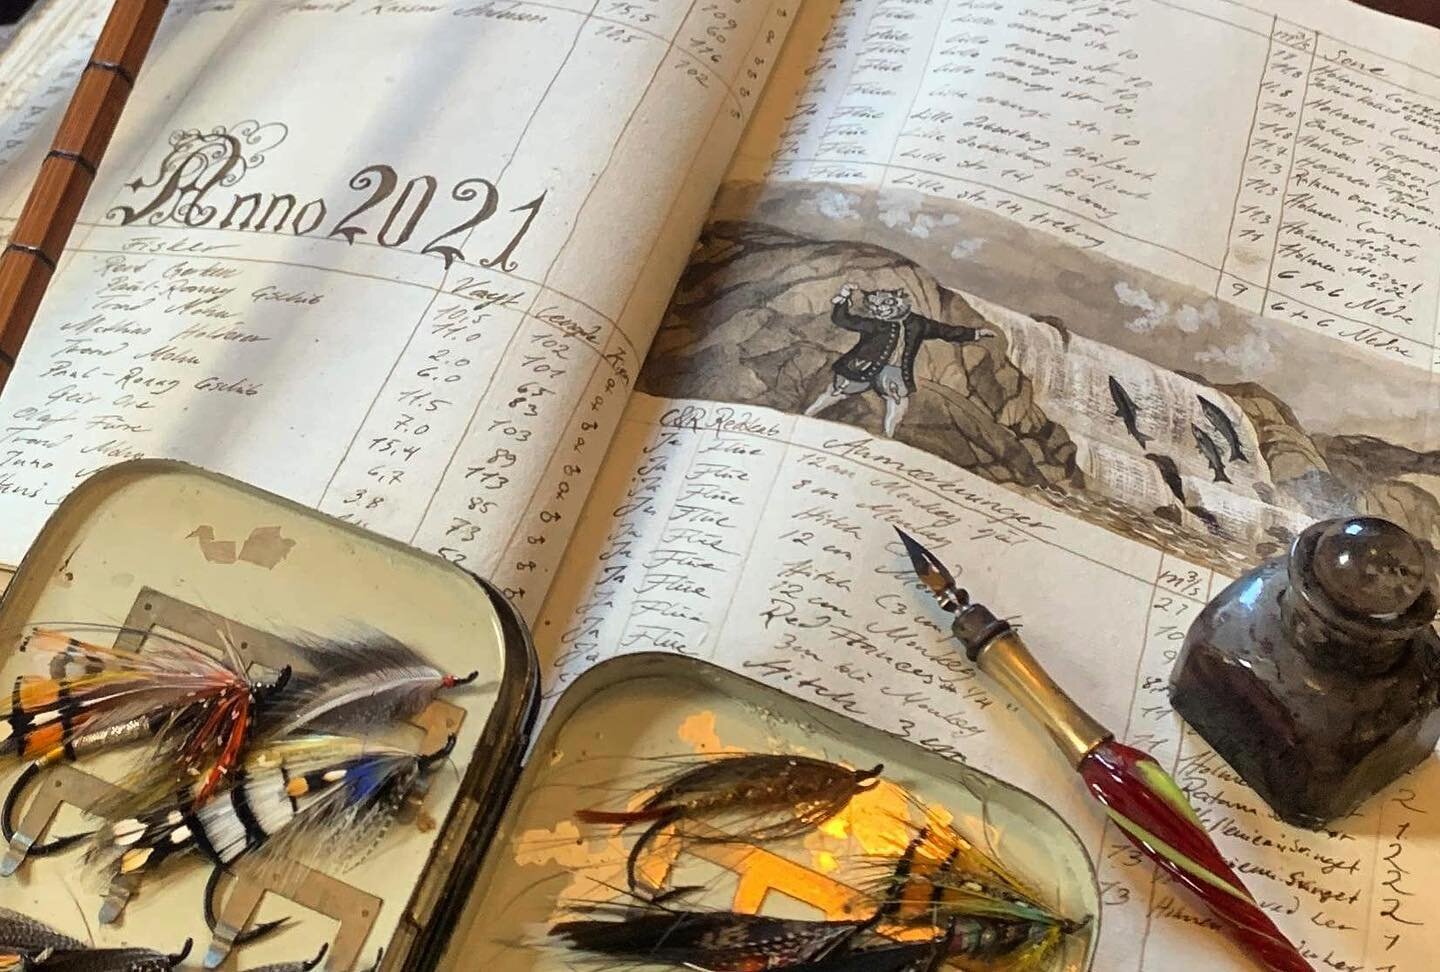 Some of the last preparations done before season opening on Older&oslash; Fly fishing lodge is filling out the old catch statistic book in the lodge with last season&rsquo;s catches, really nice job, pure mindfulness.
&bull;
&bull;
#older&oslash; #no